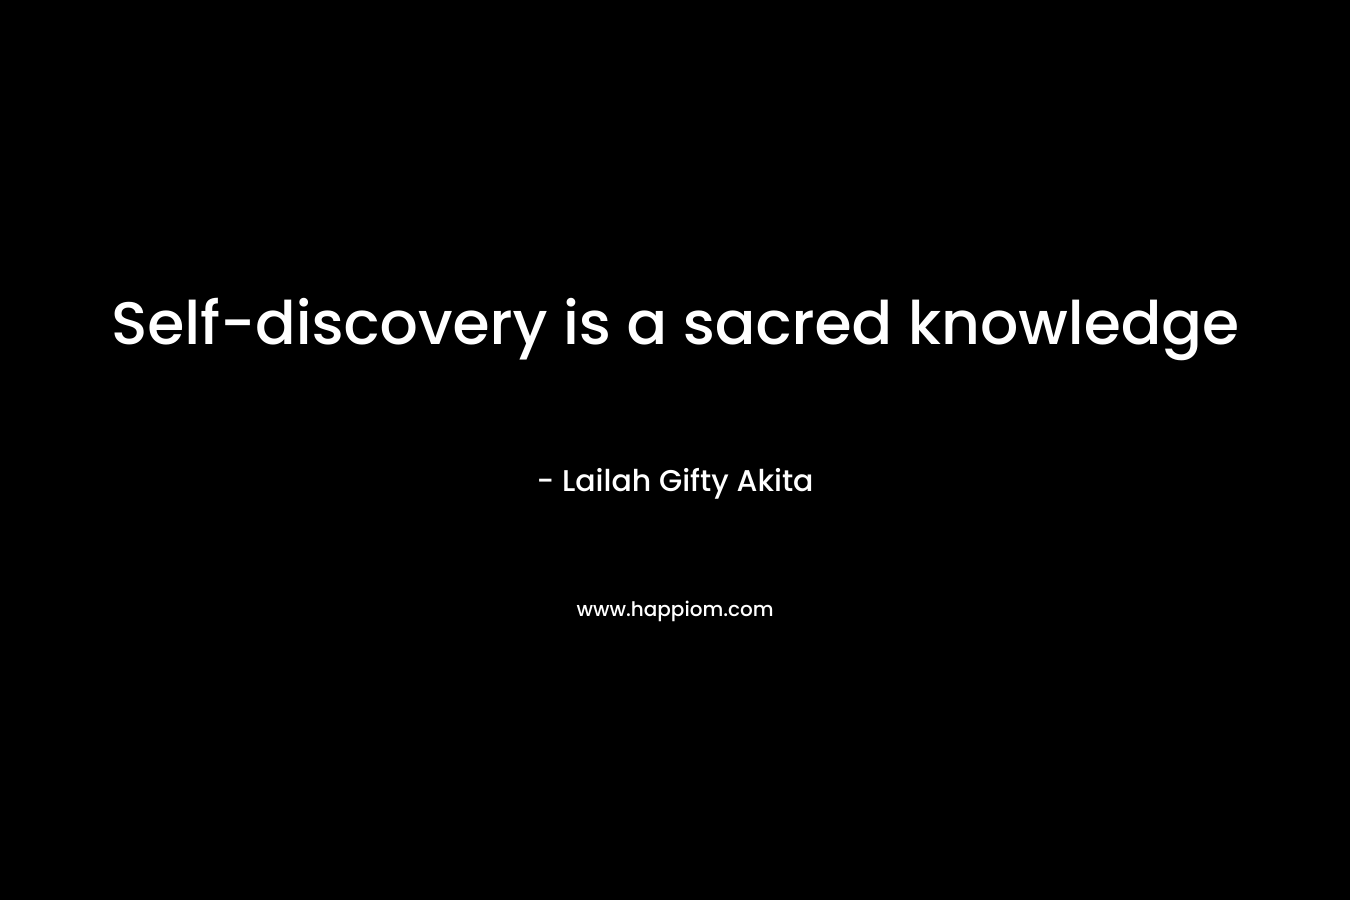 Self-discovery is a sacred knowledge